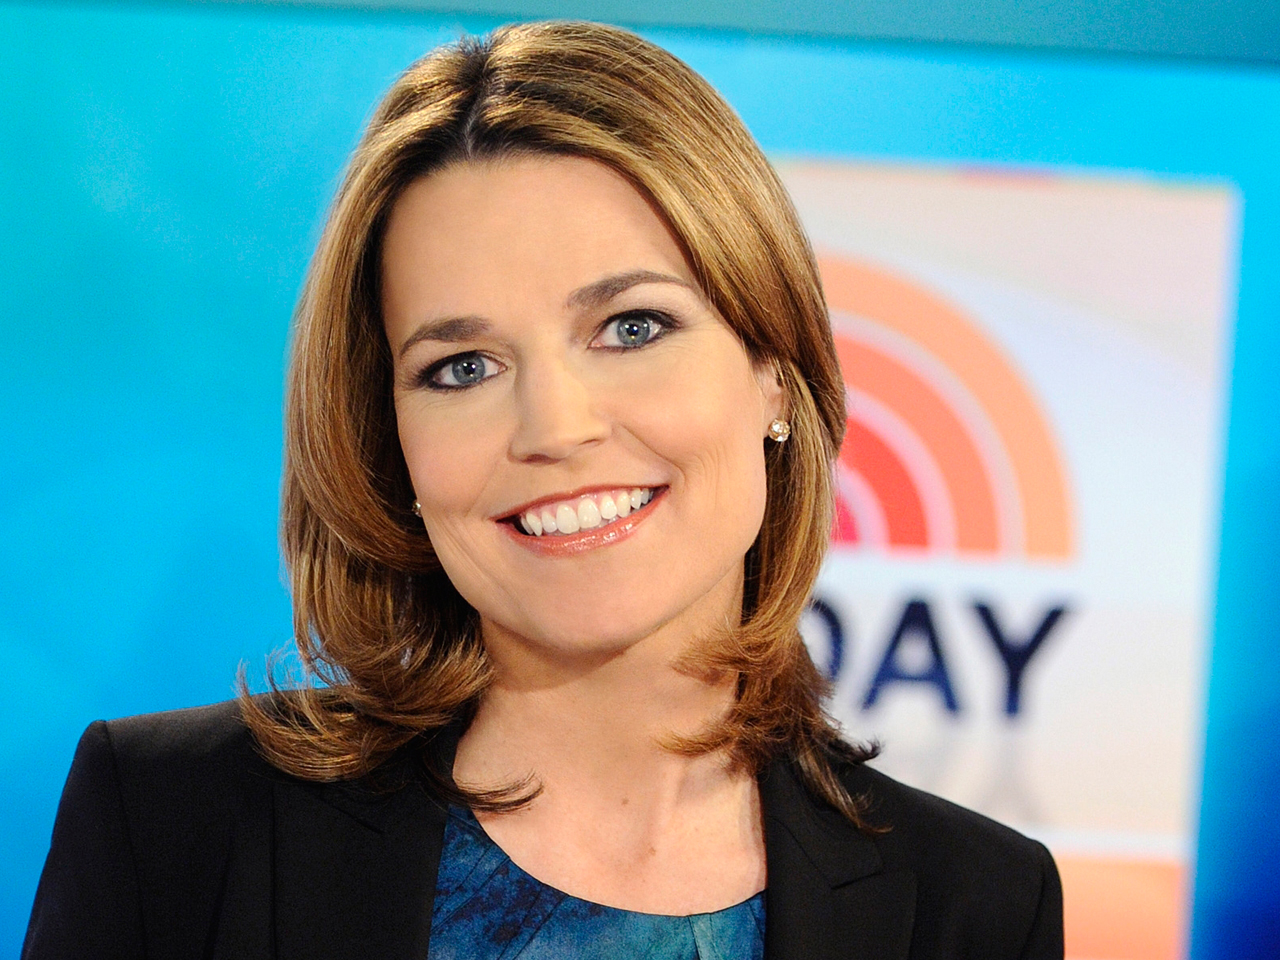 NBC Renews Savannah Guthrie’s Contract at “Today”